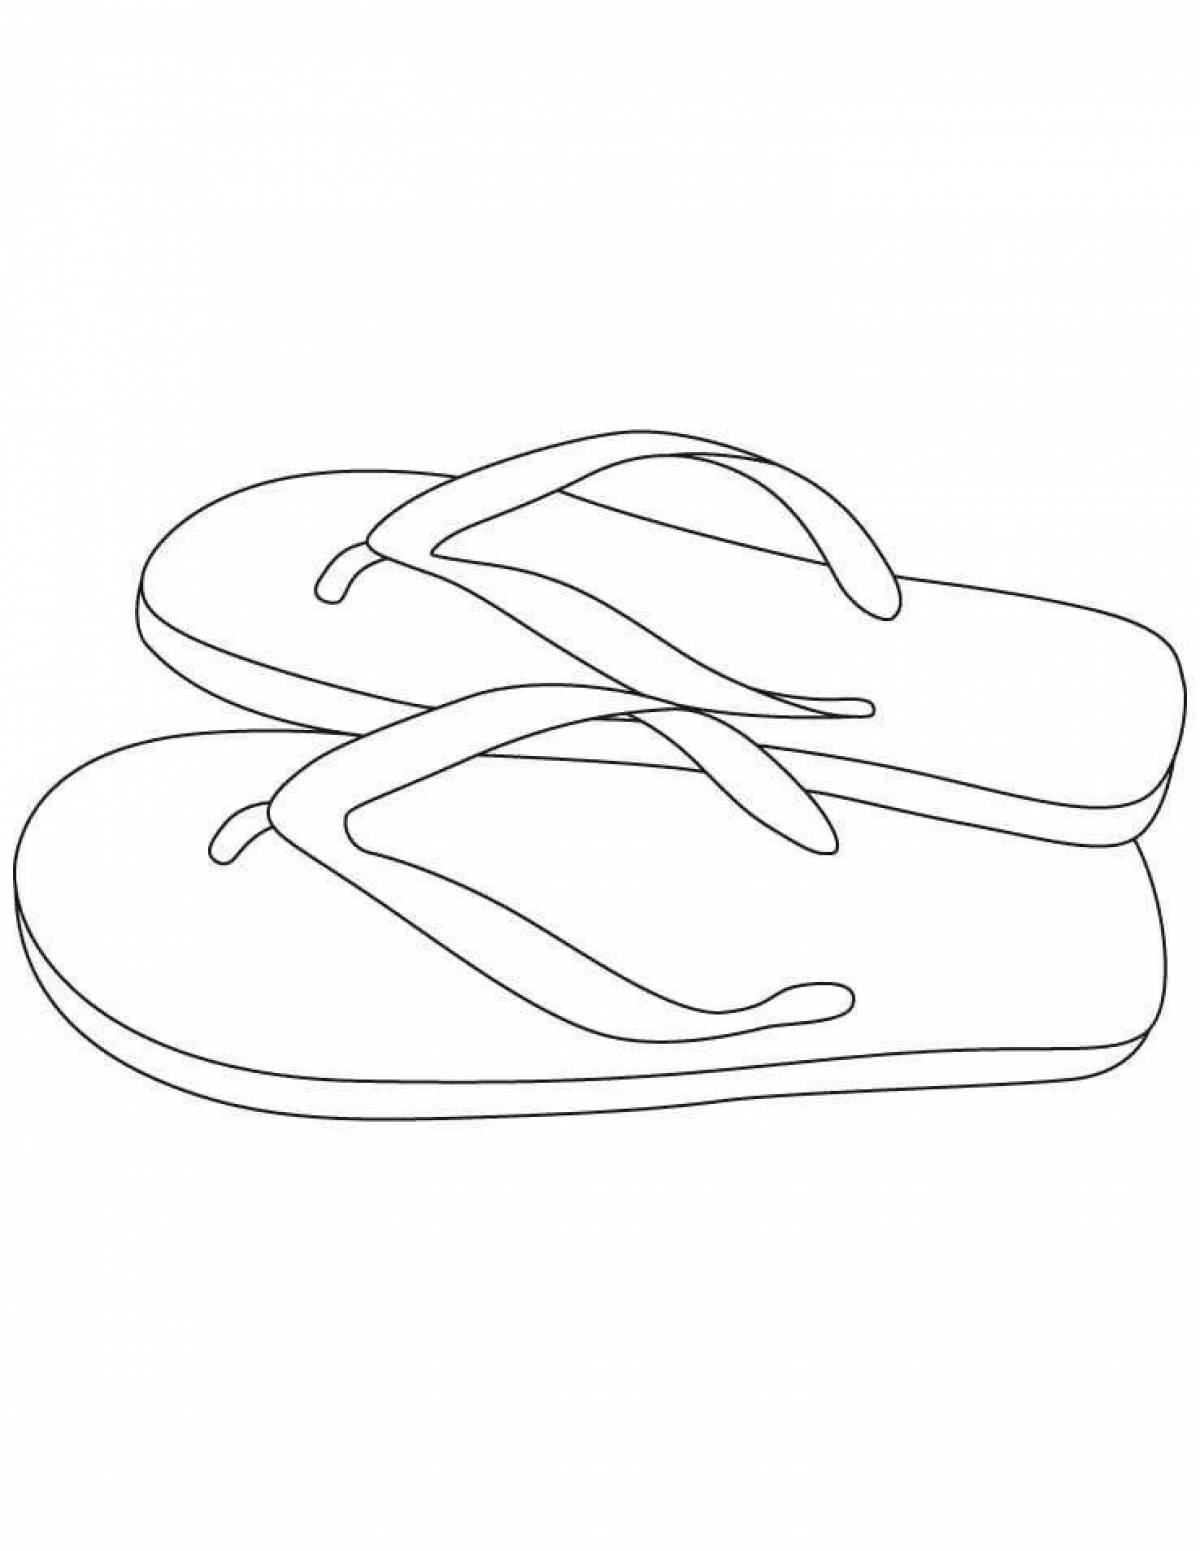 Coloring page exquisite slippers